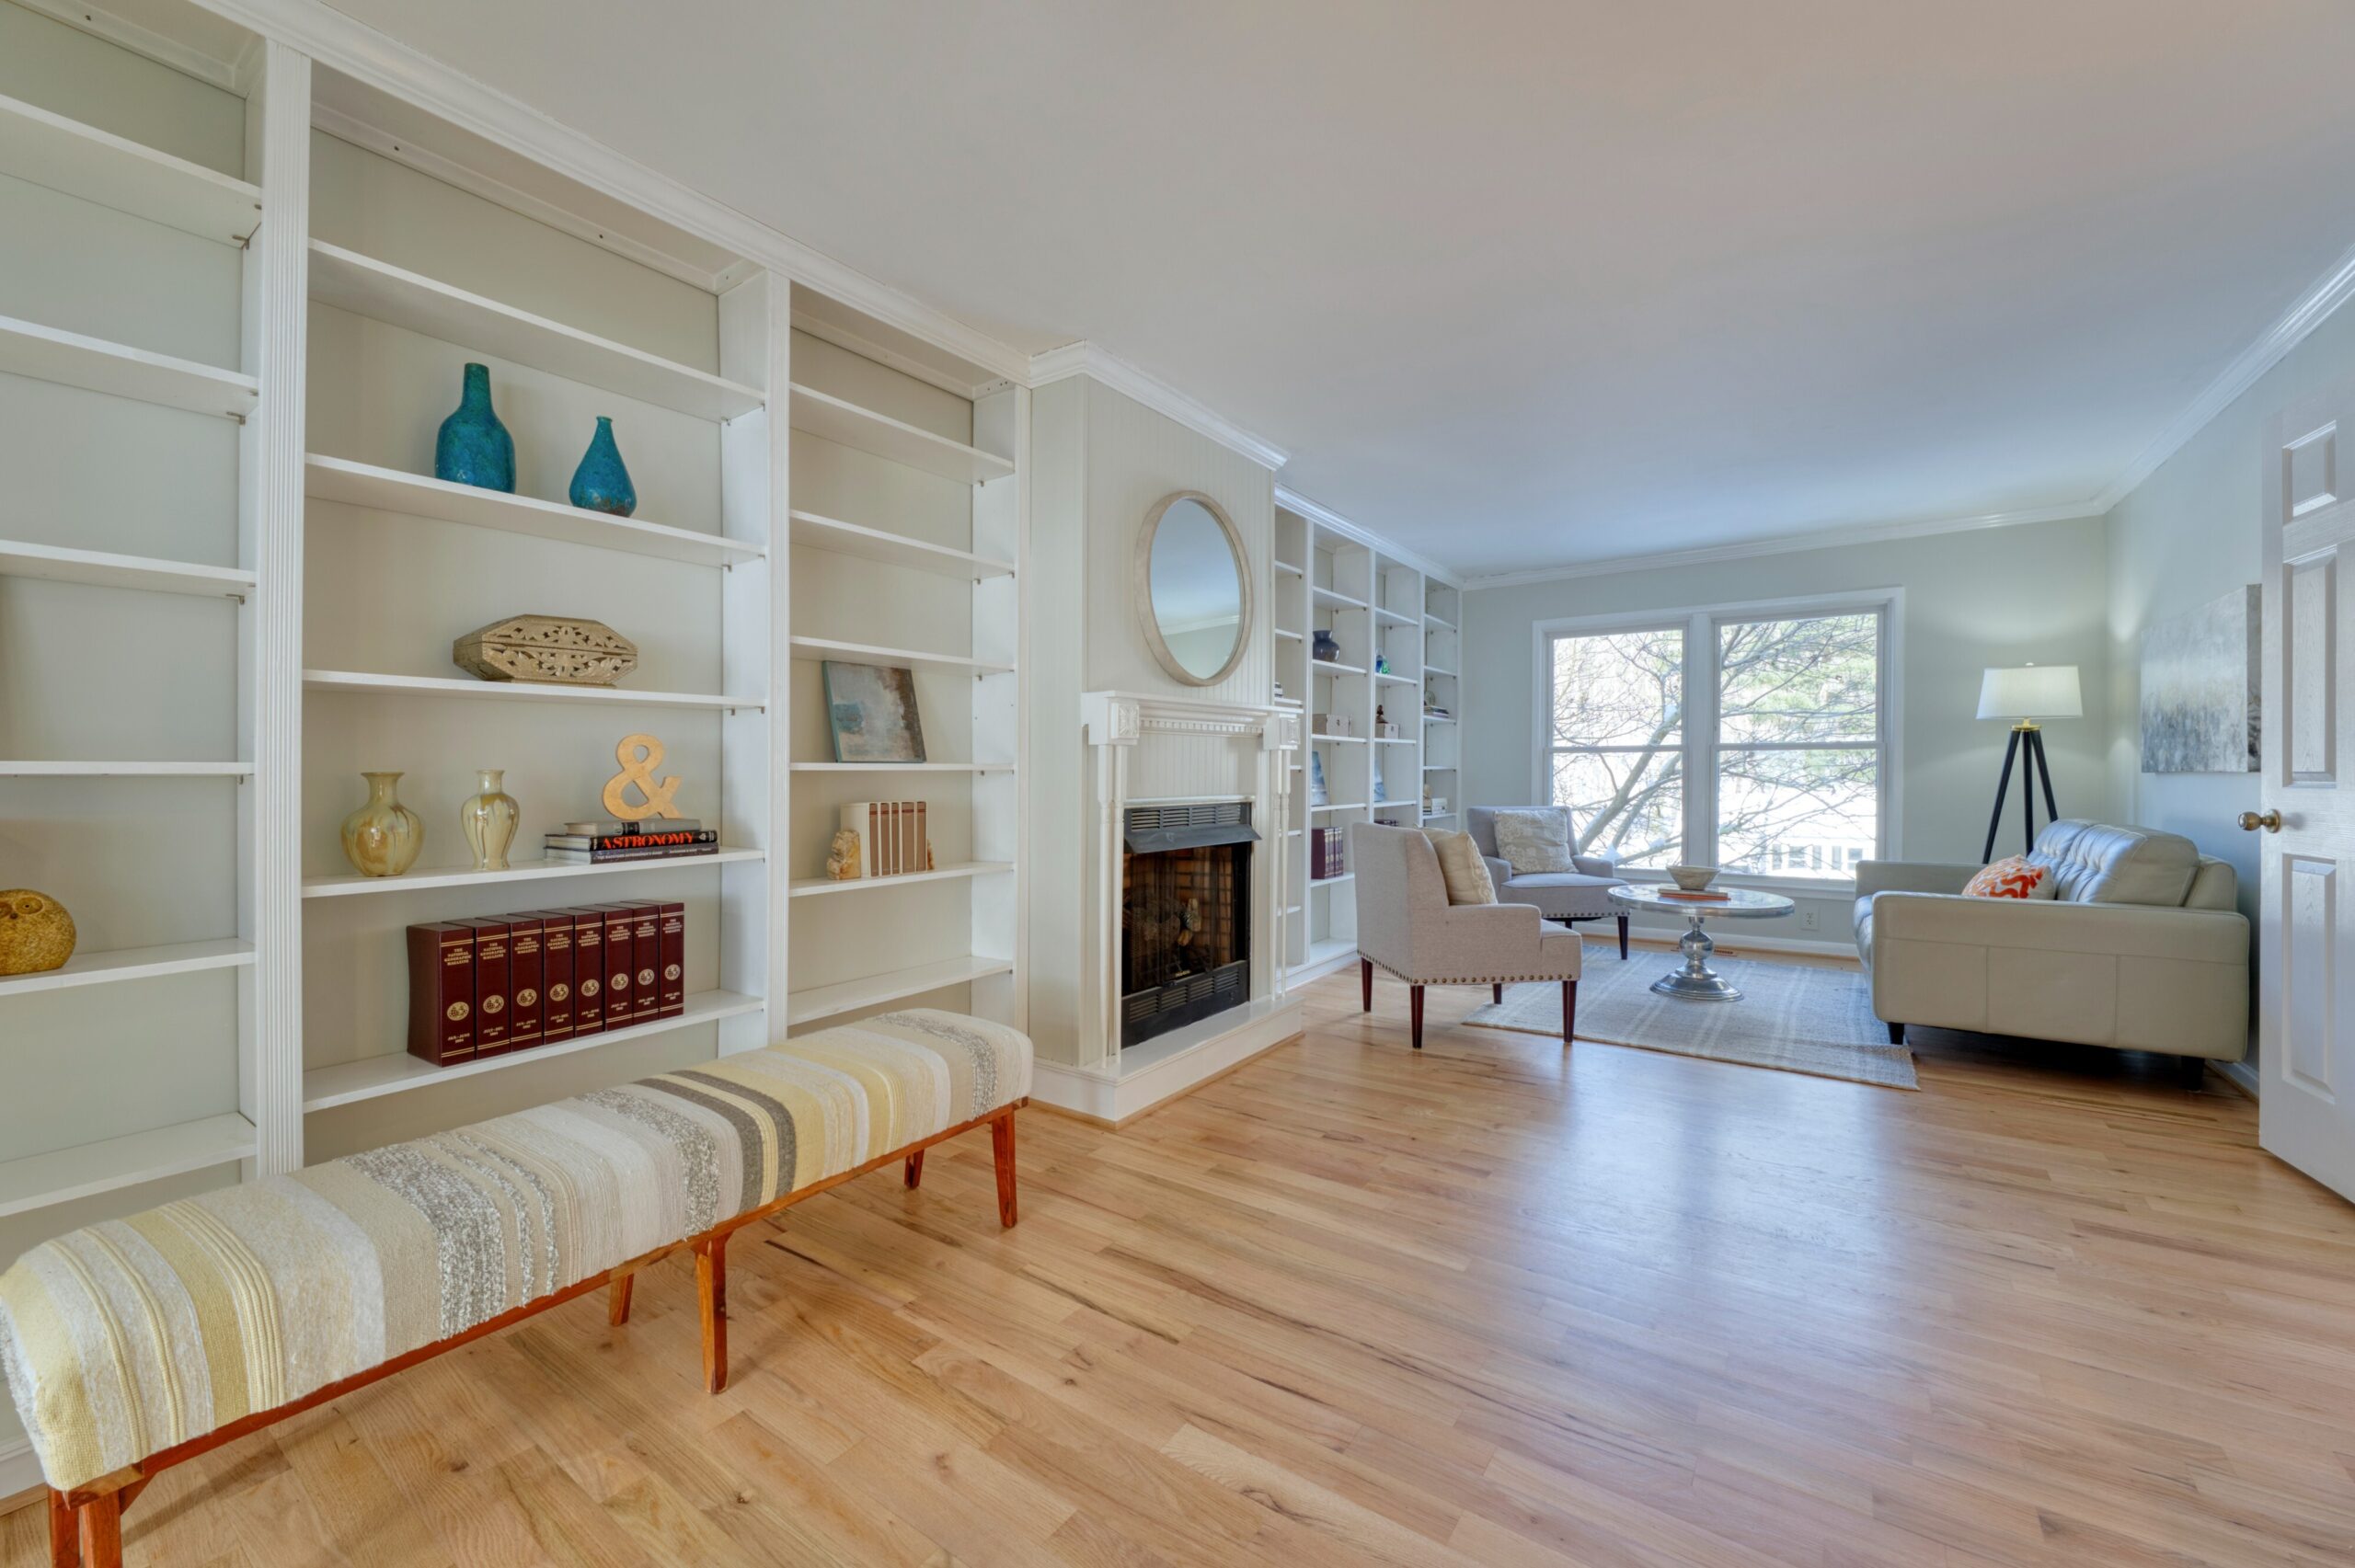 Professional interior photo of 9515 Center St in Vienna, Virginia - showing the living room area with hardwood floors, wall to wall build in shelves on either side of a fireplace